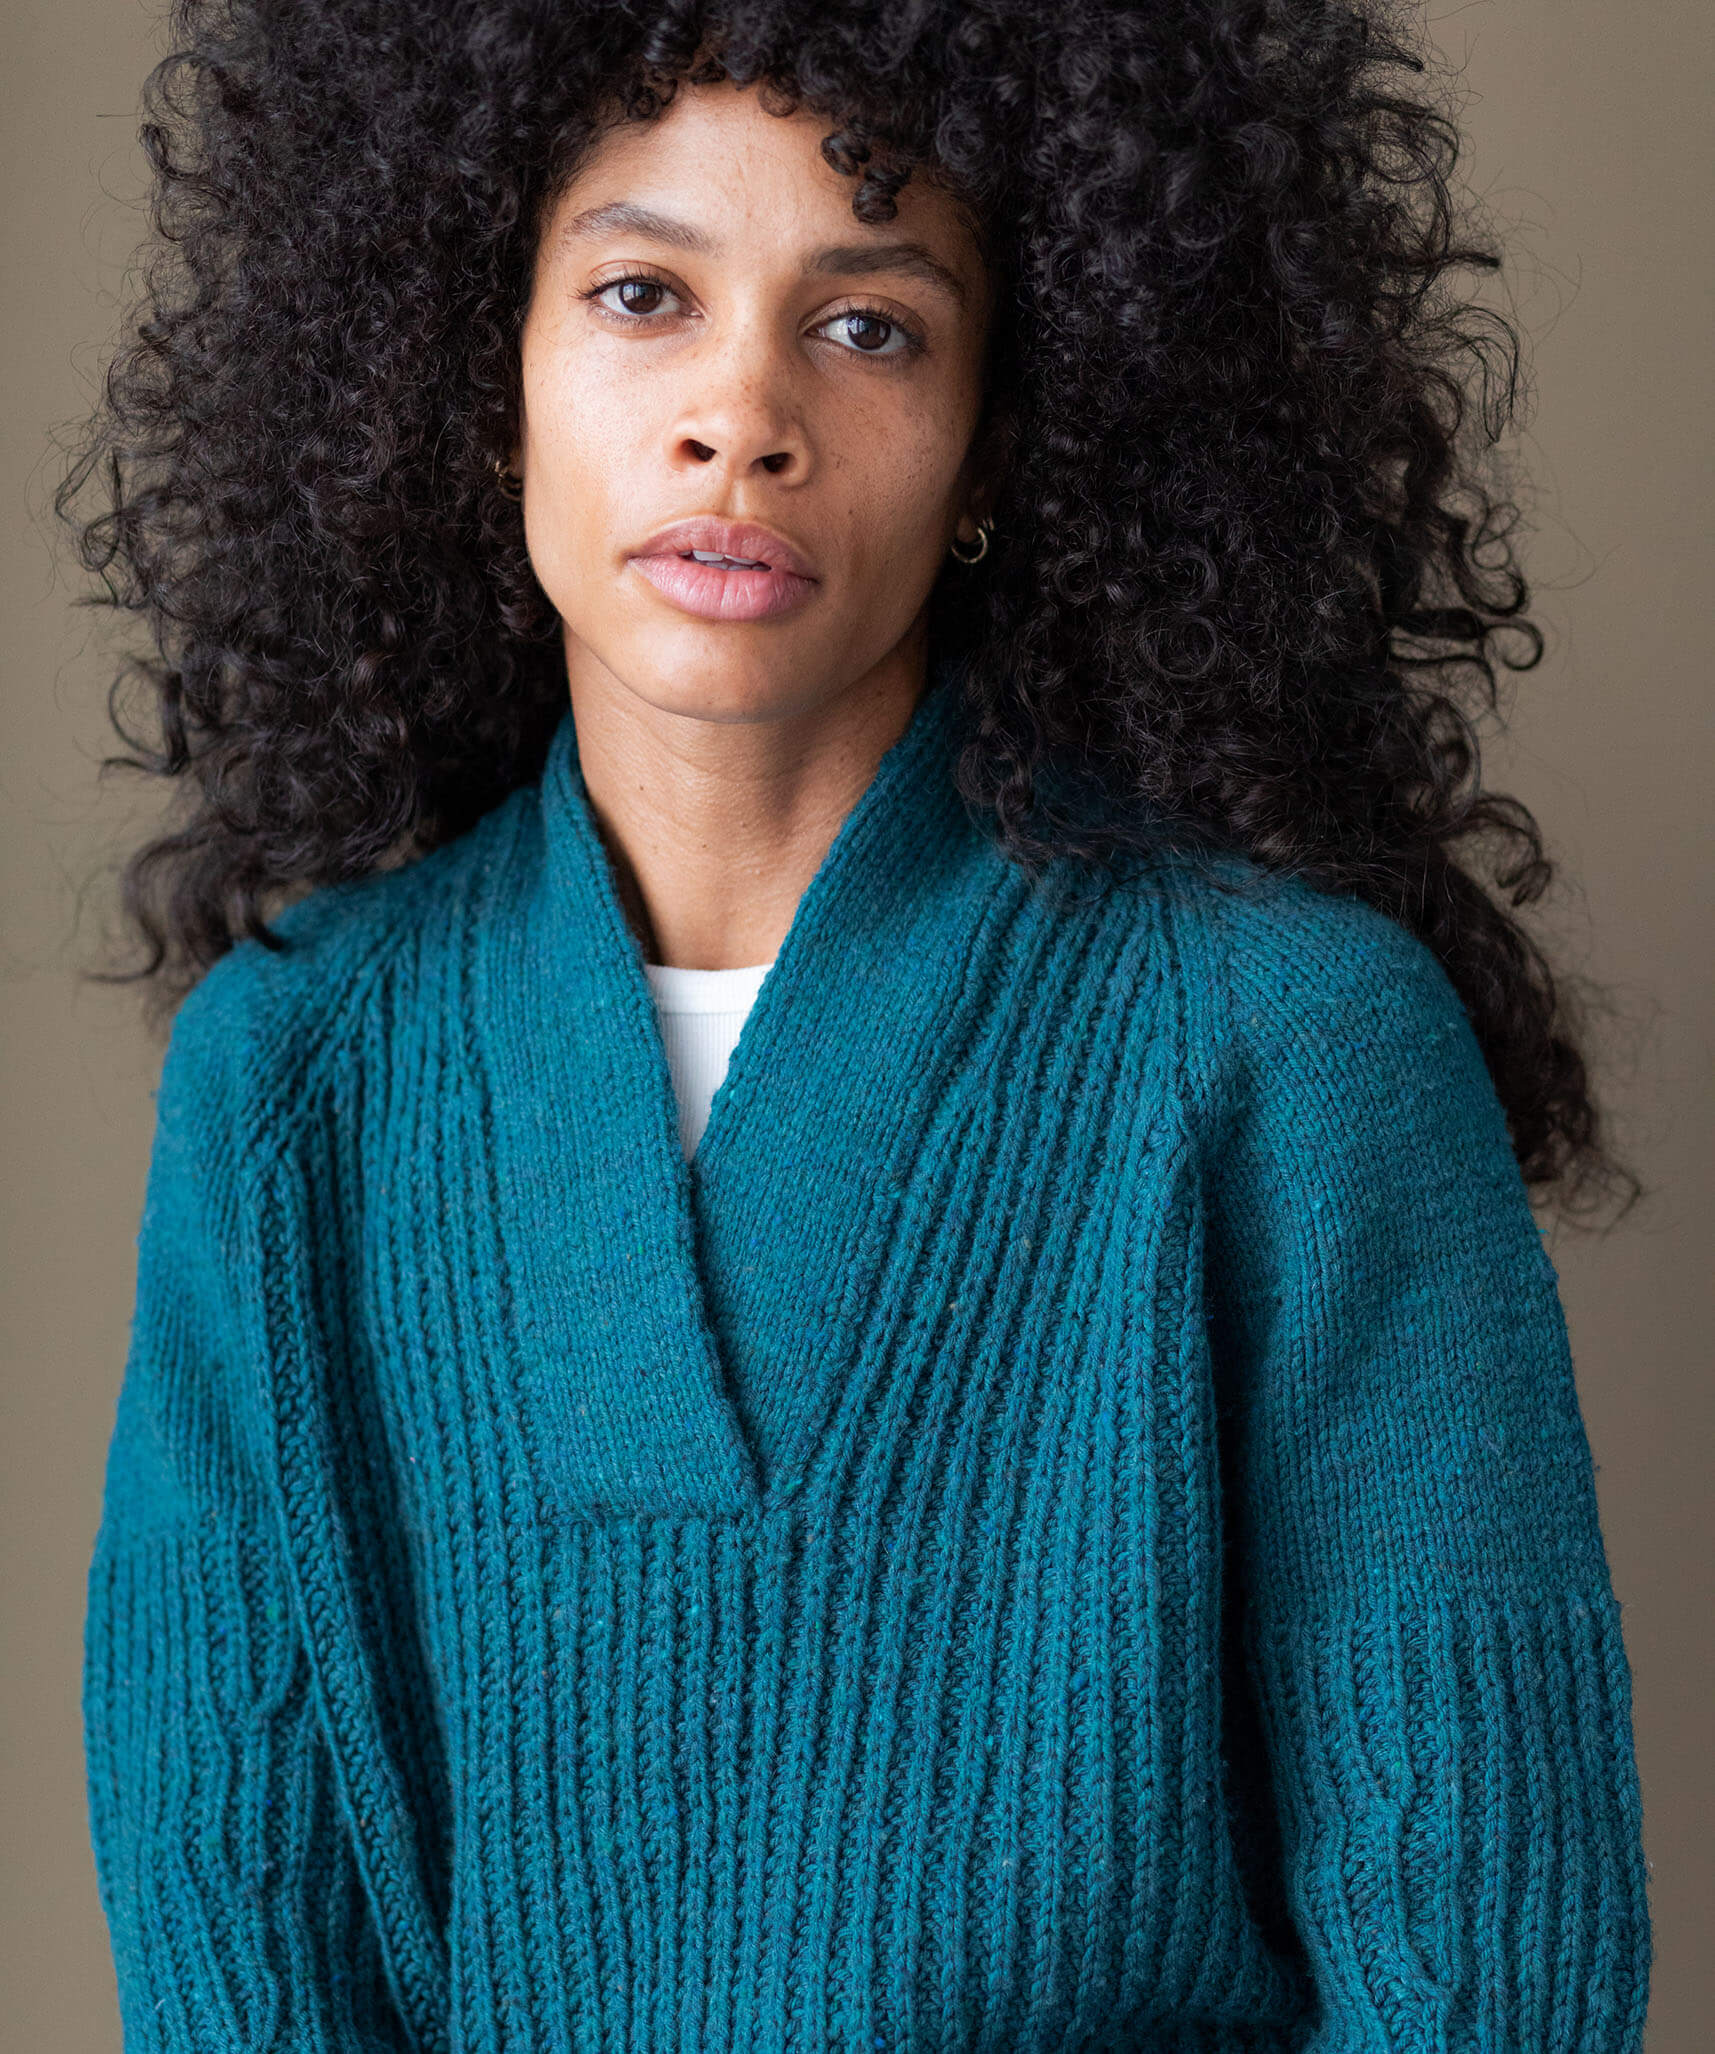 Spalding Pullover | Knitting Pattern by Zanete Hussain | Brooklyn Tweed